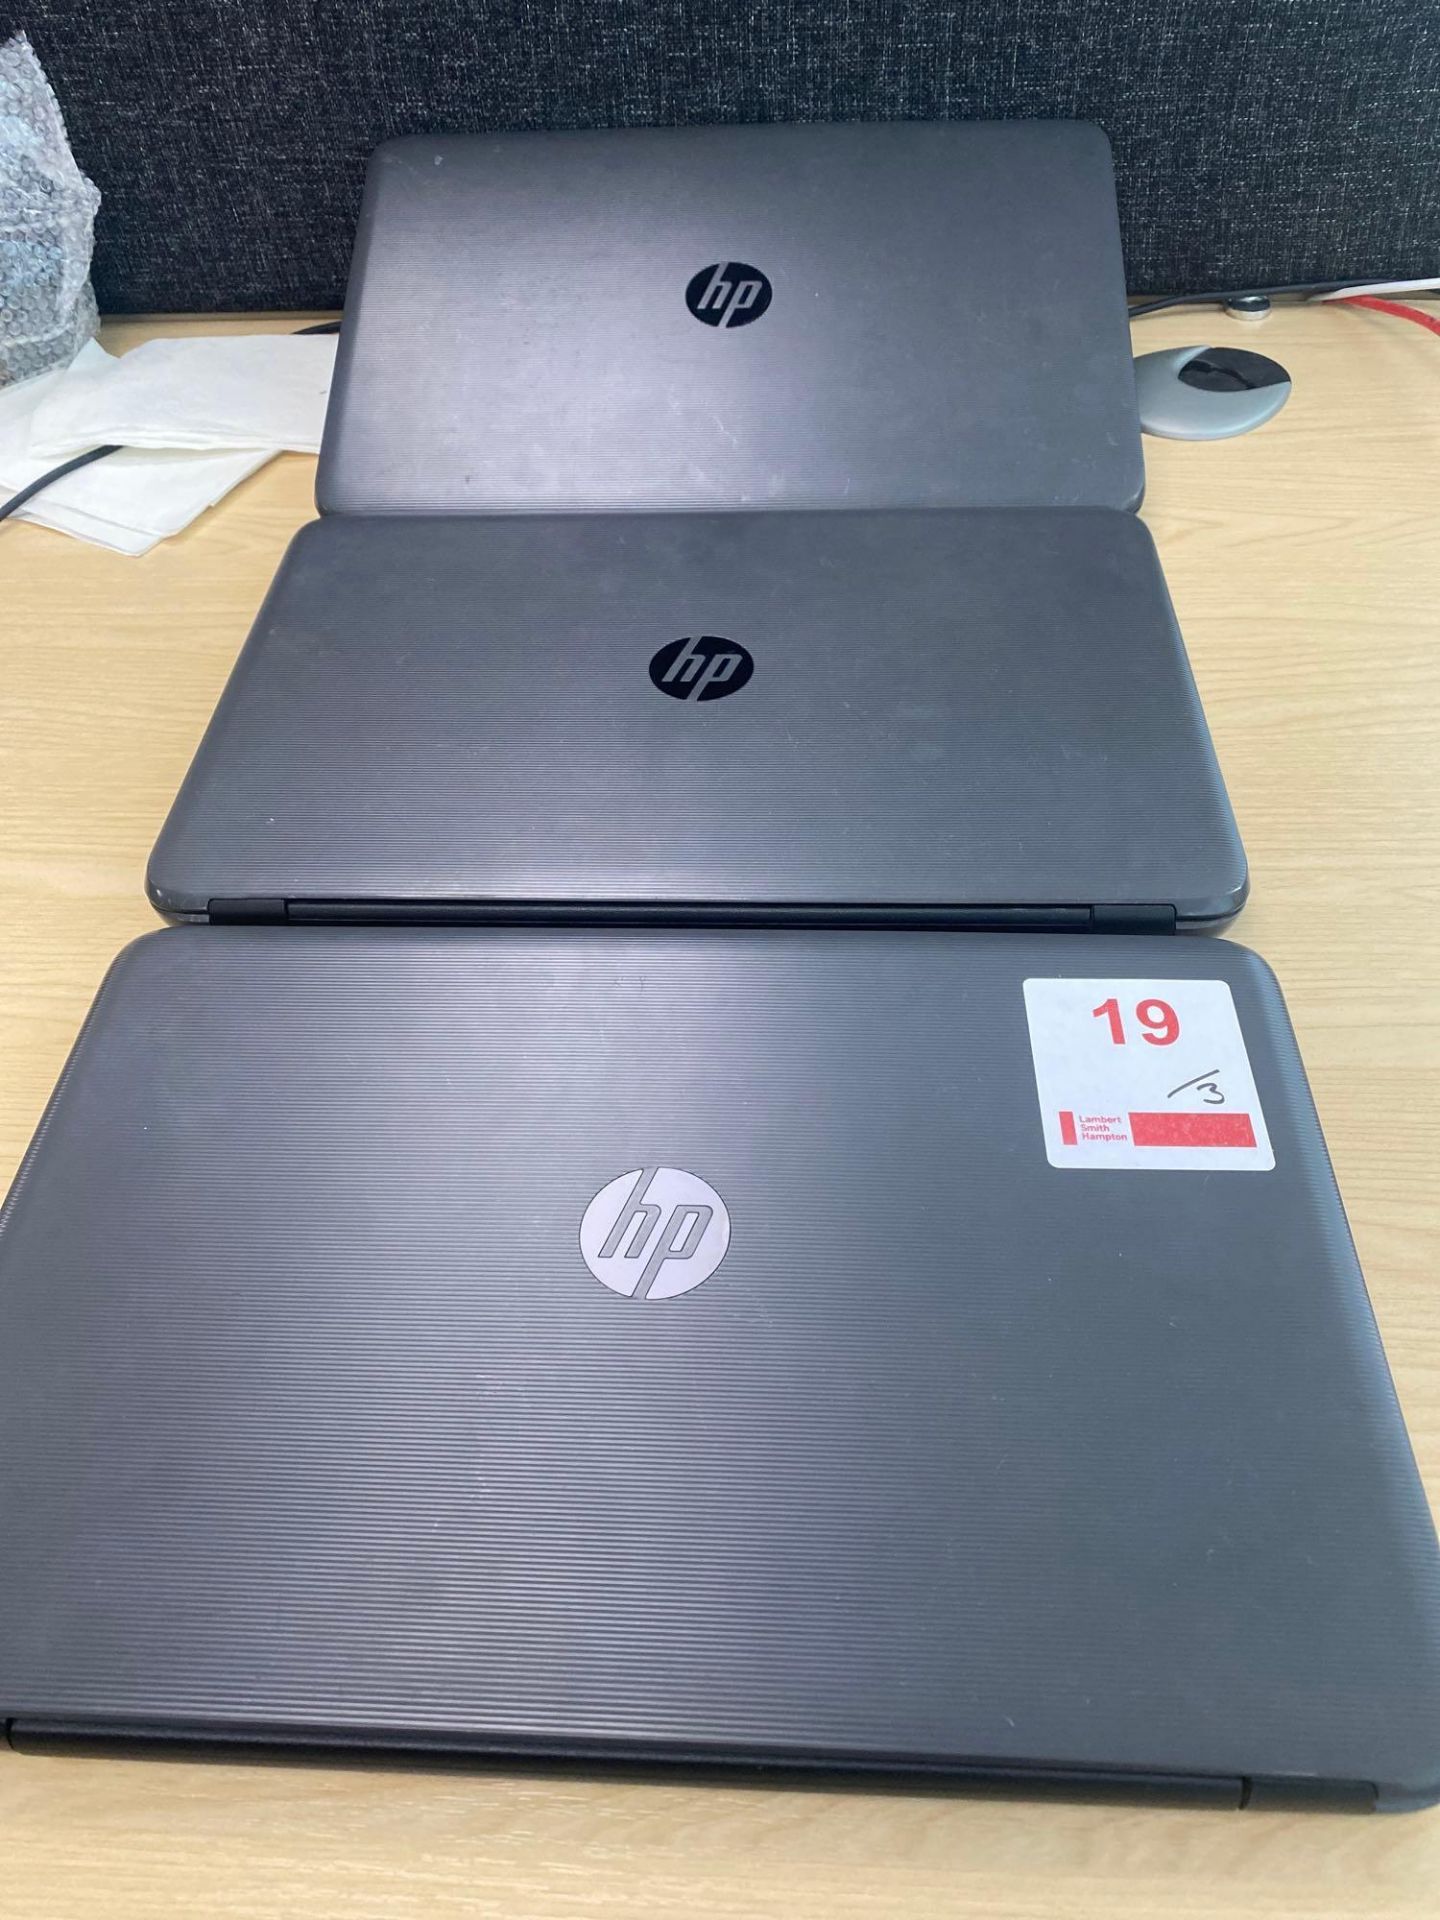 3 Hewlett Packard 250 G5, 15” laptops with i3 processor and chargers